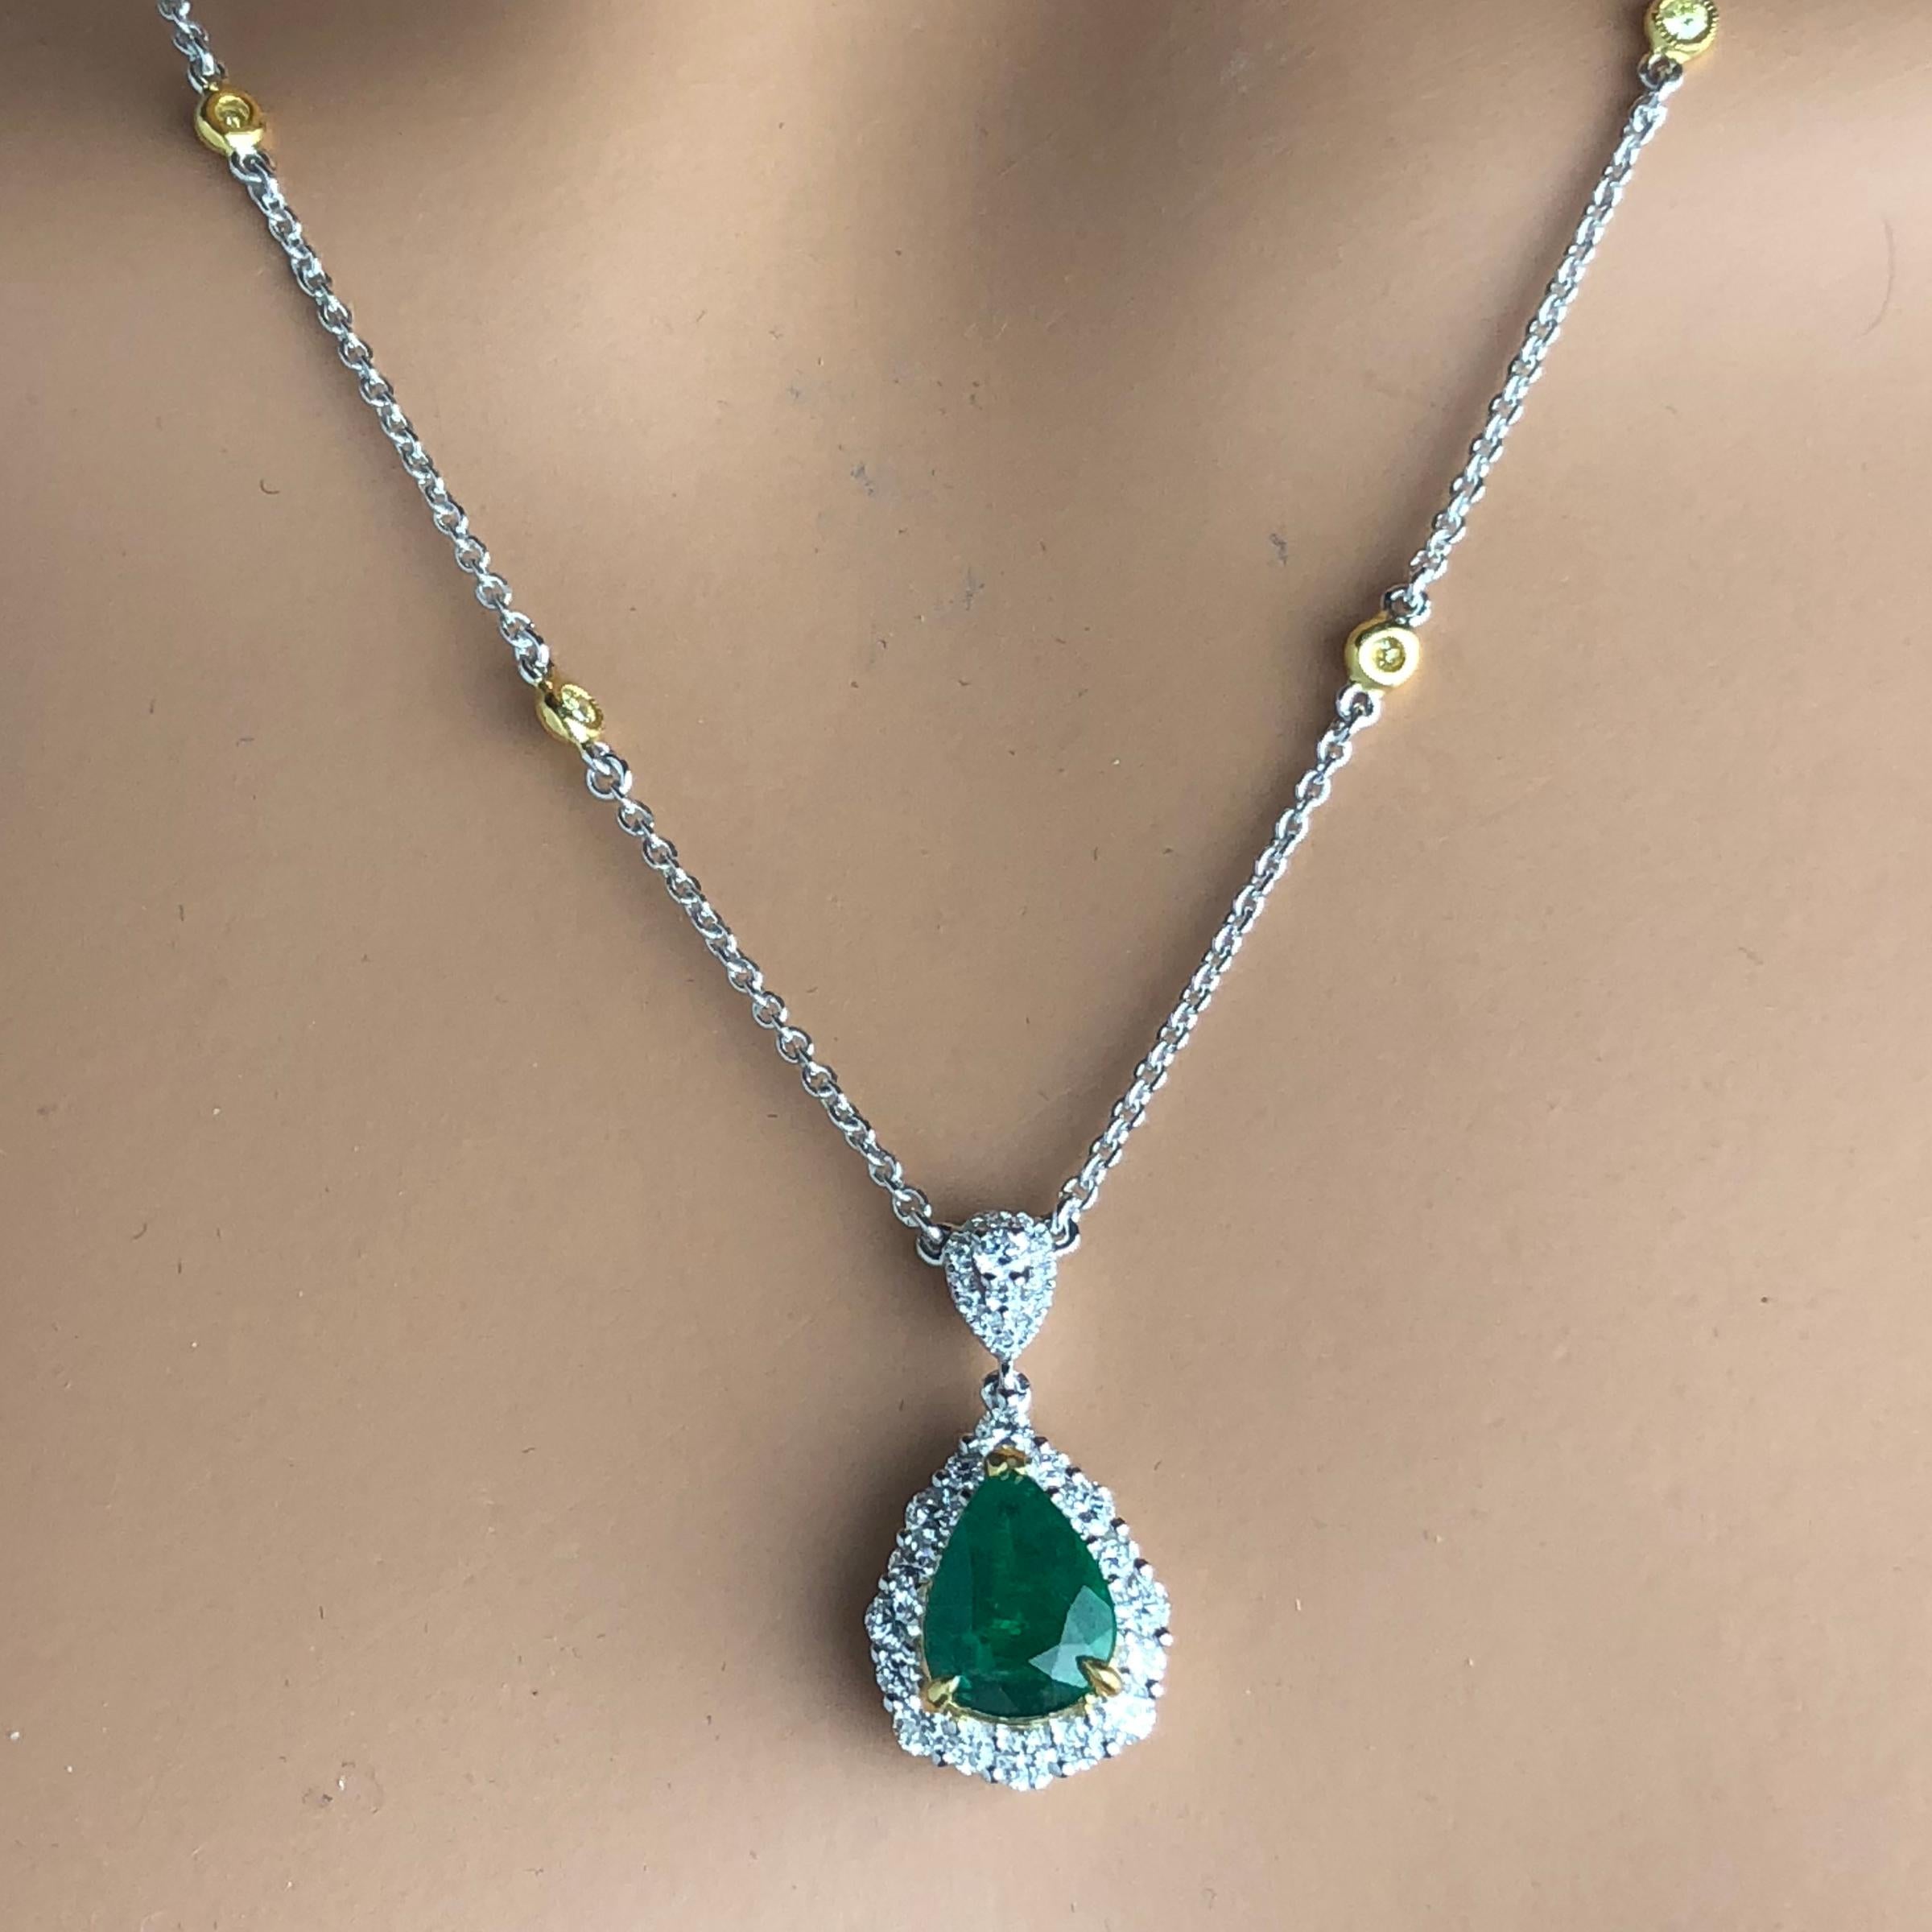 (DiamondTown) This gorgeous pendant features a 2.10 carat pear shaped Emerald center, surrounded by a halo of round white diamonds. The decorated bail also features white diamonds. With diamonds placed along the chain, the total diamond weight is